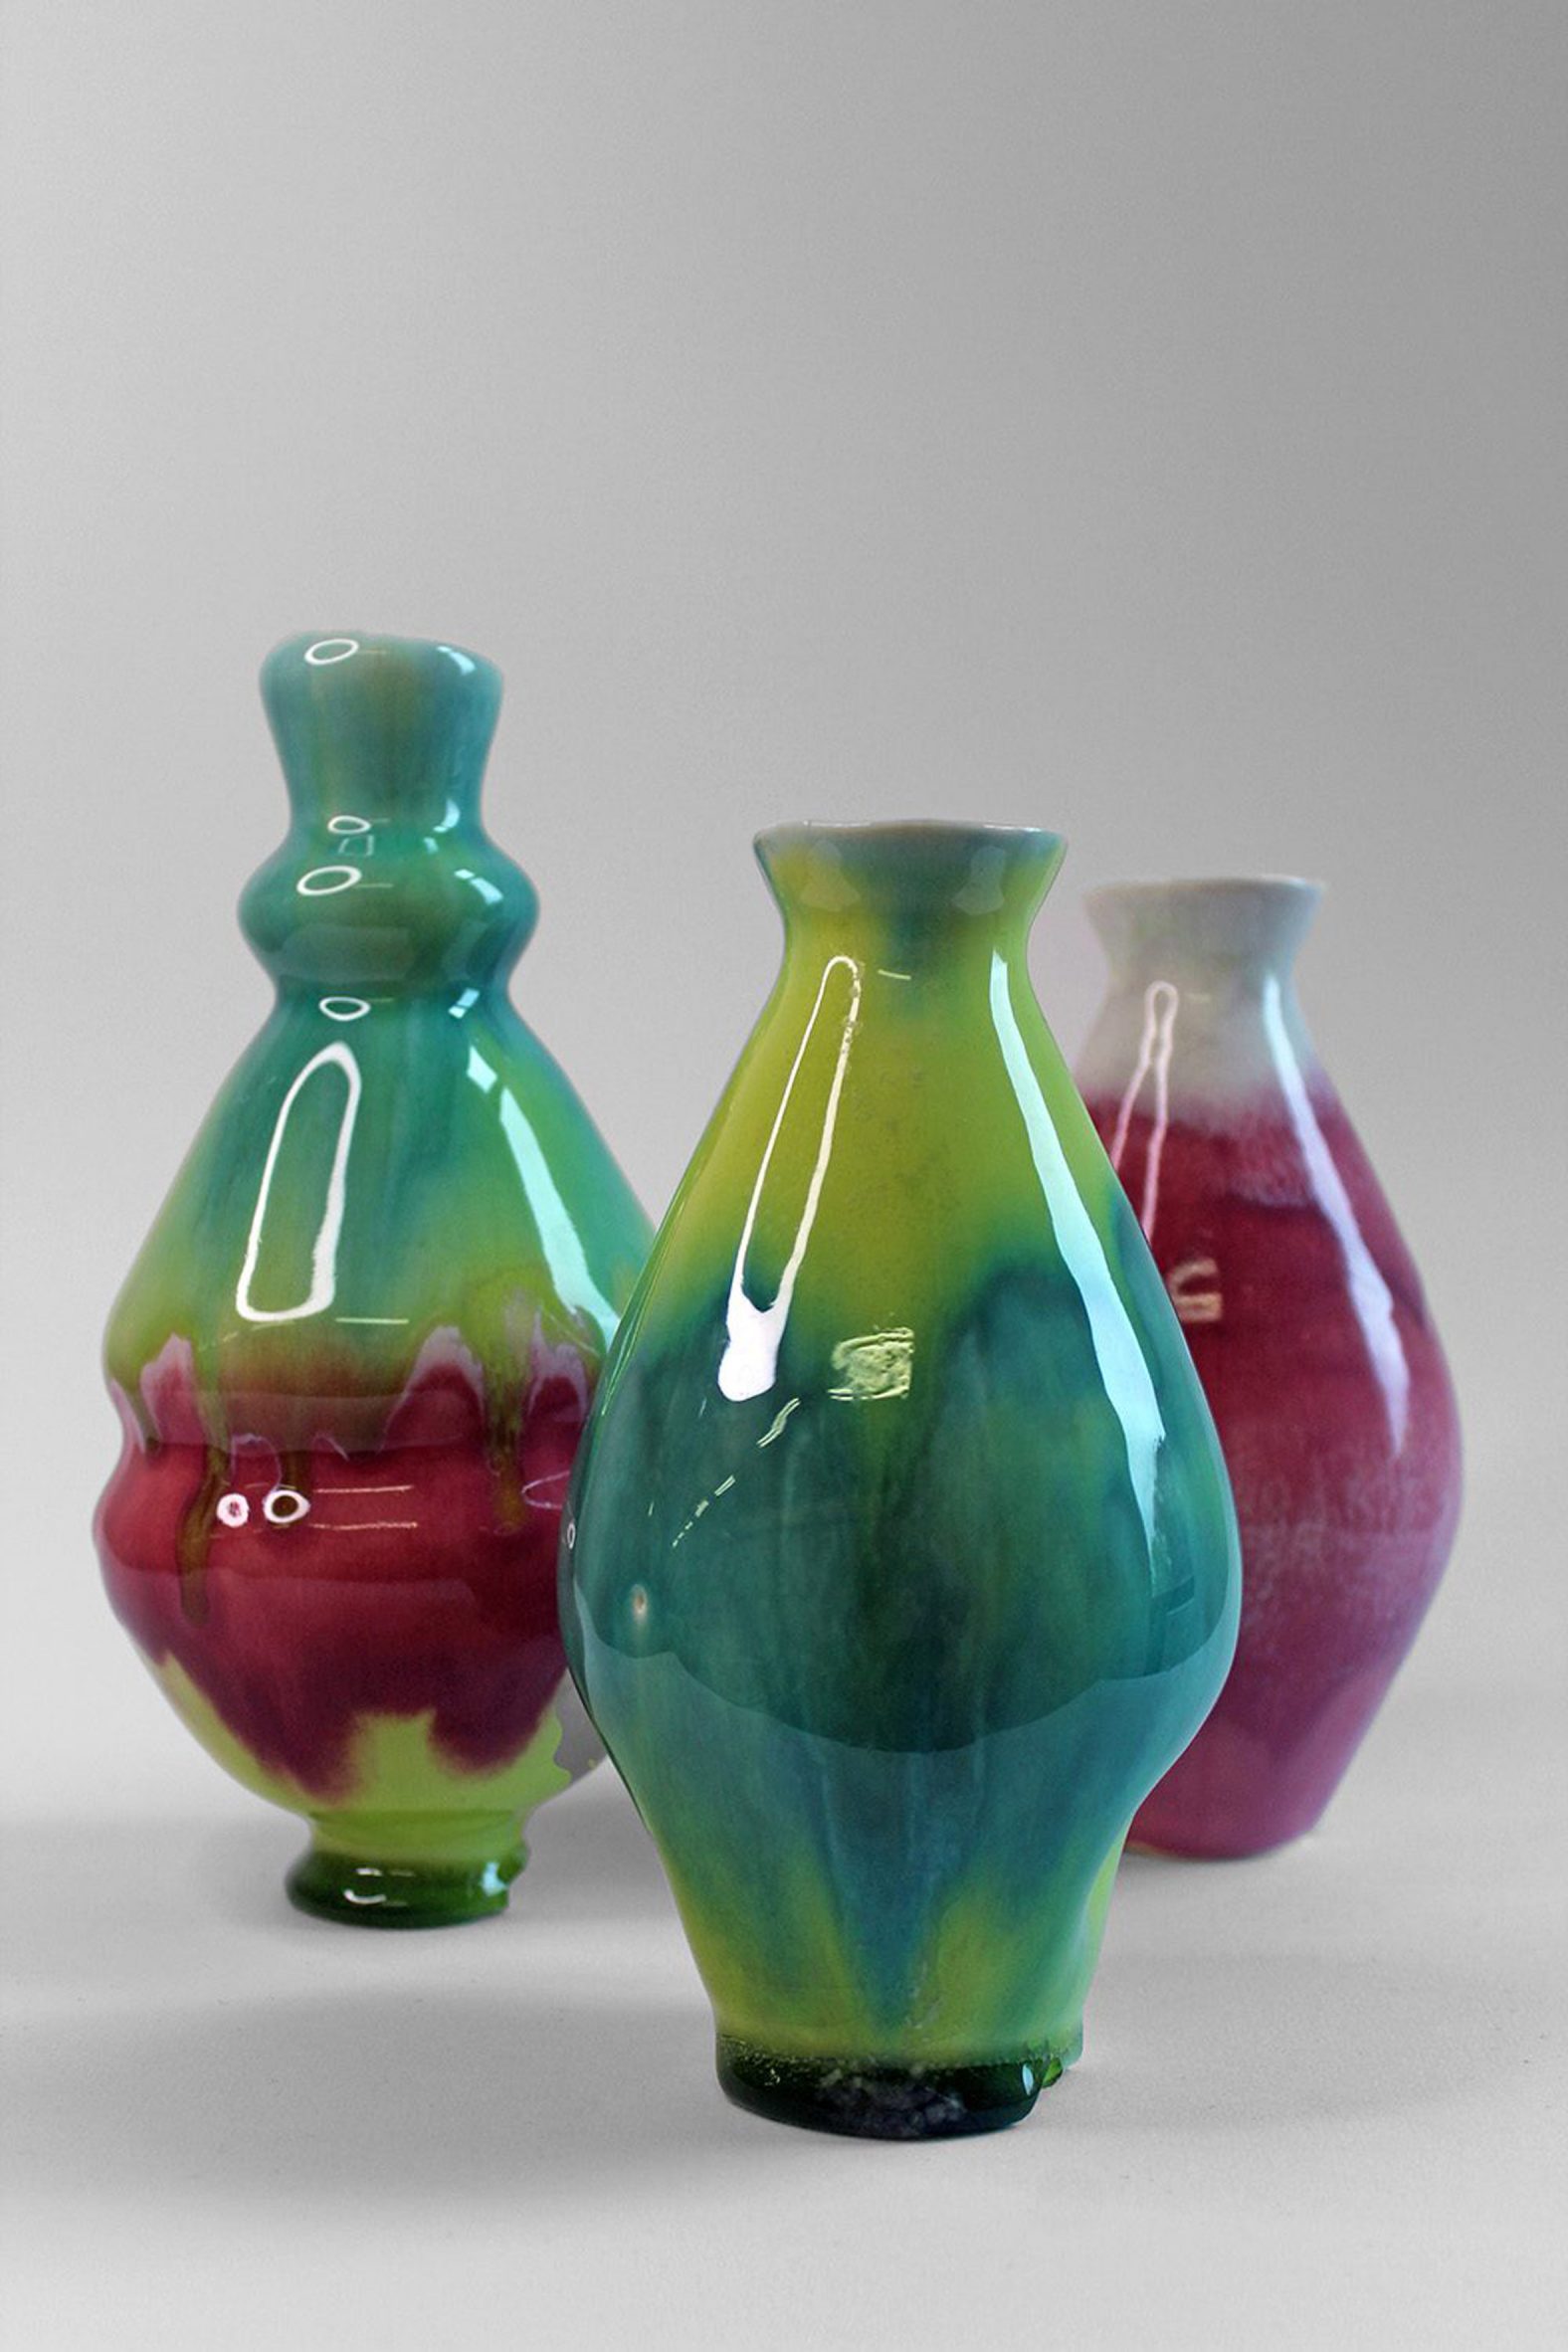 Three ceramic bottles in green, blue and pink hues